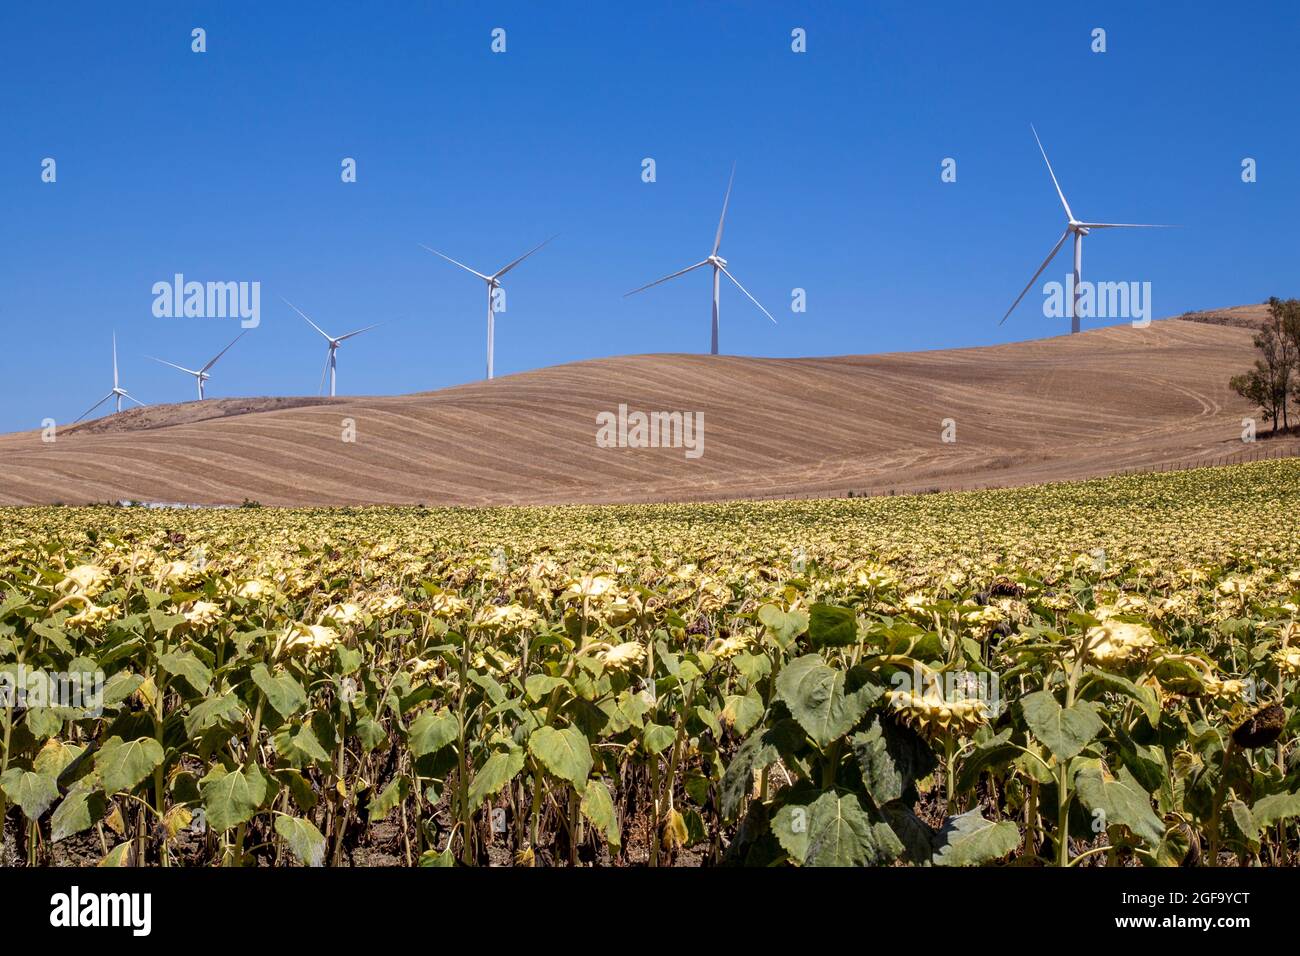 Windmills to create renewable energy in agricultural fields Stock Photo